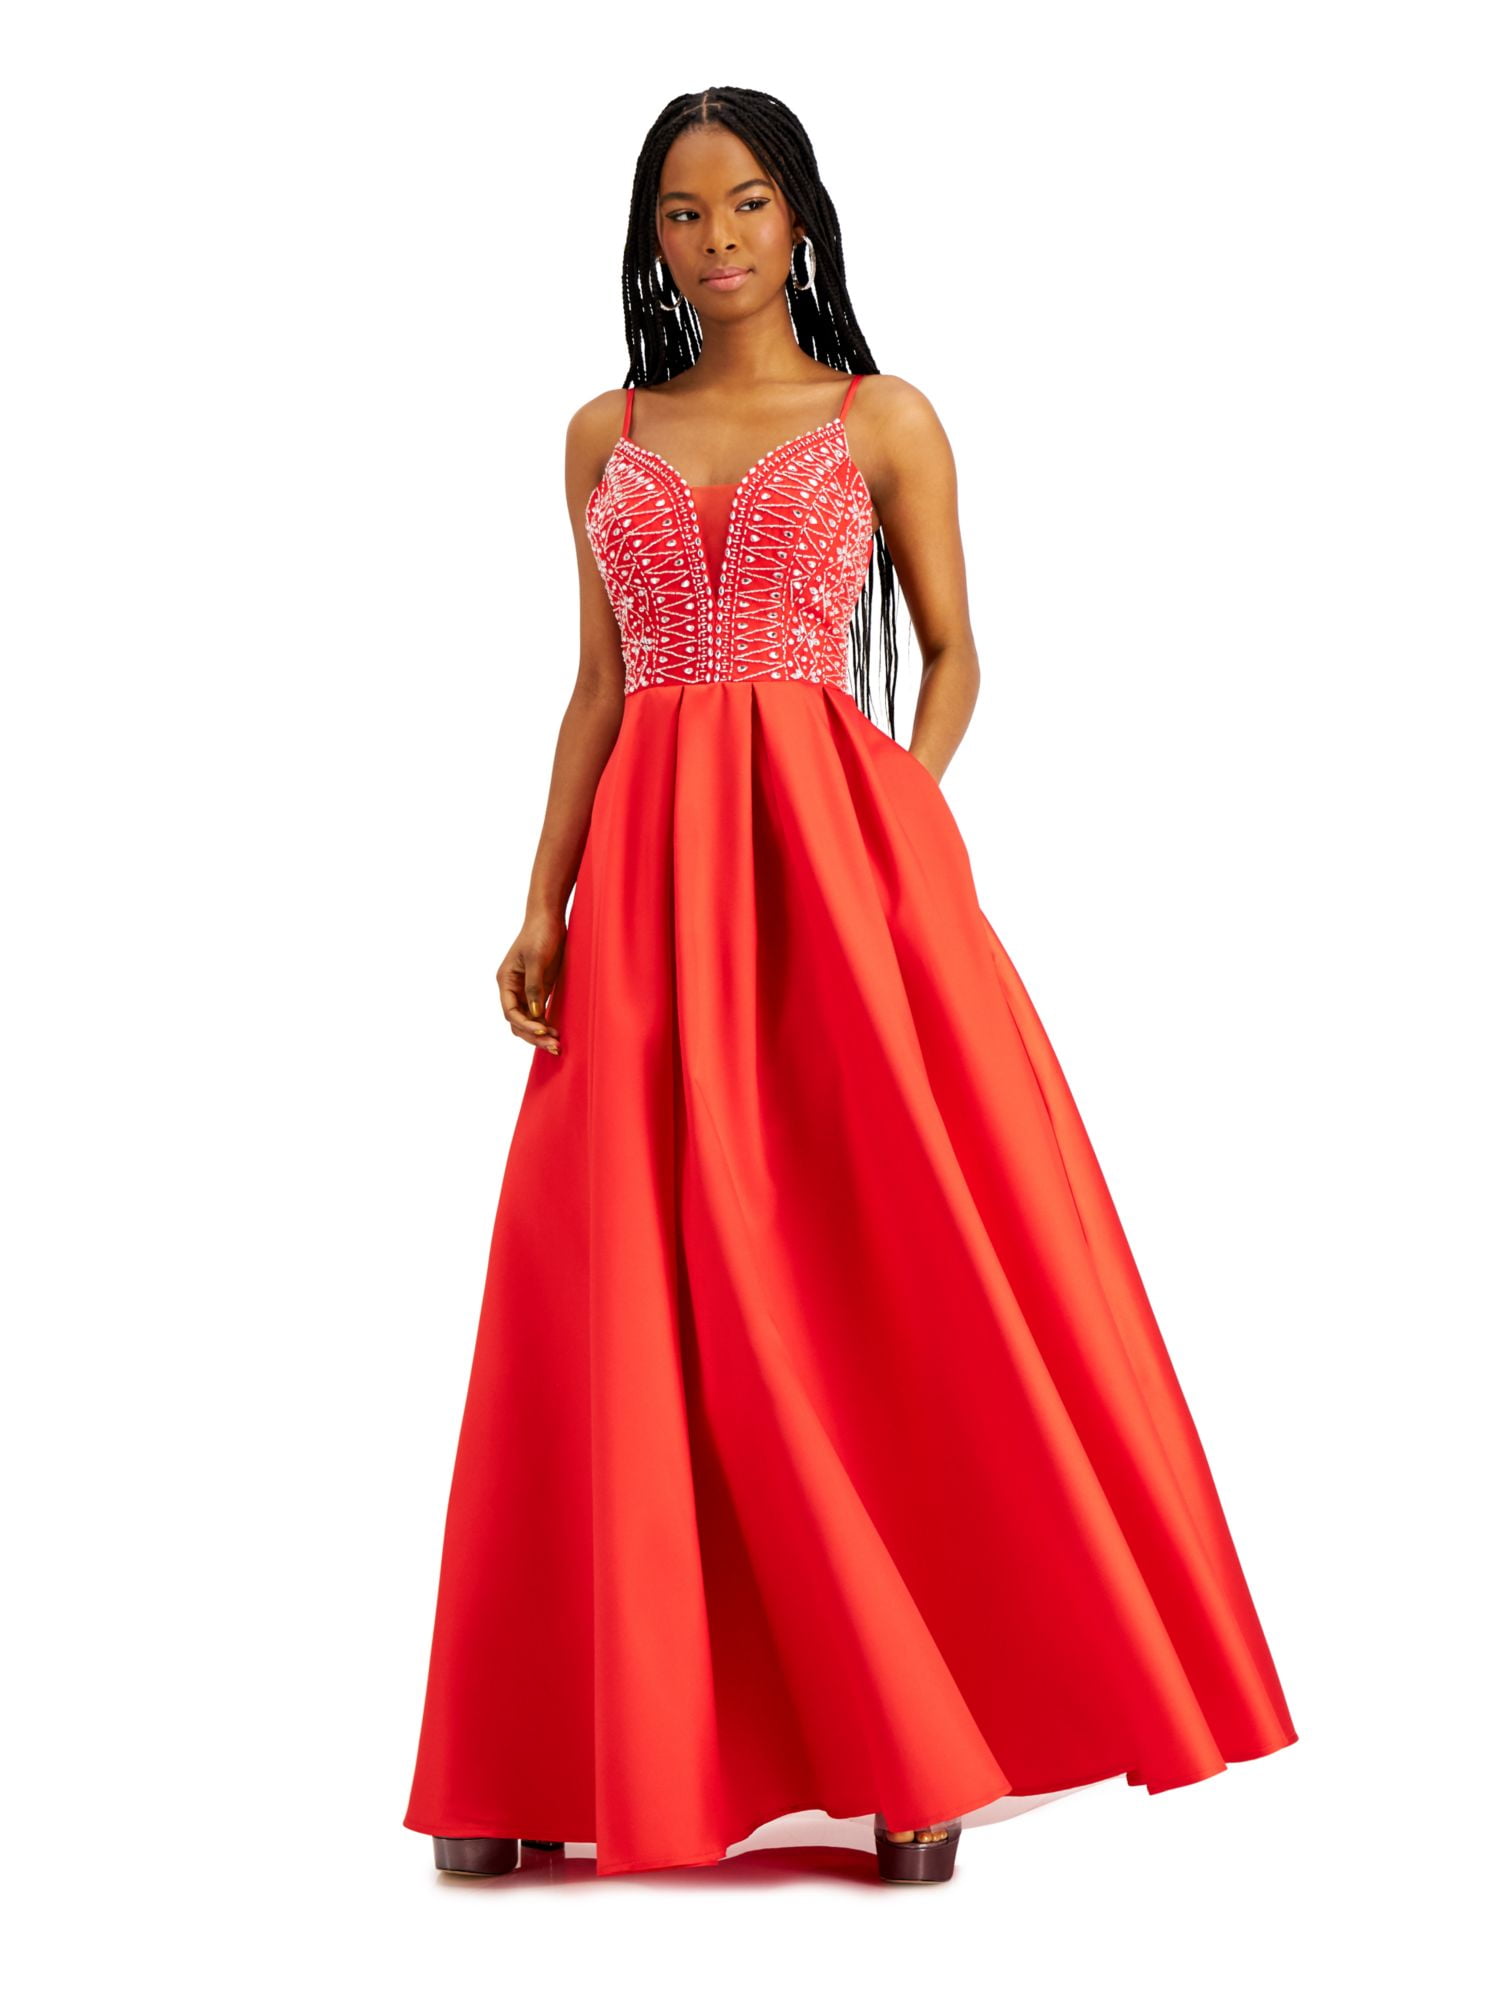 Red Spaghetti Strap Satin Puffy Prom Dress with Crystals, Beading Gorgeous  Formal Dress N1558 – Simibridaldresses